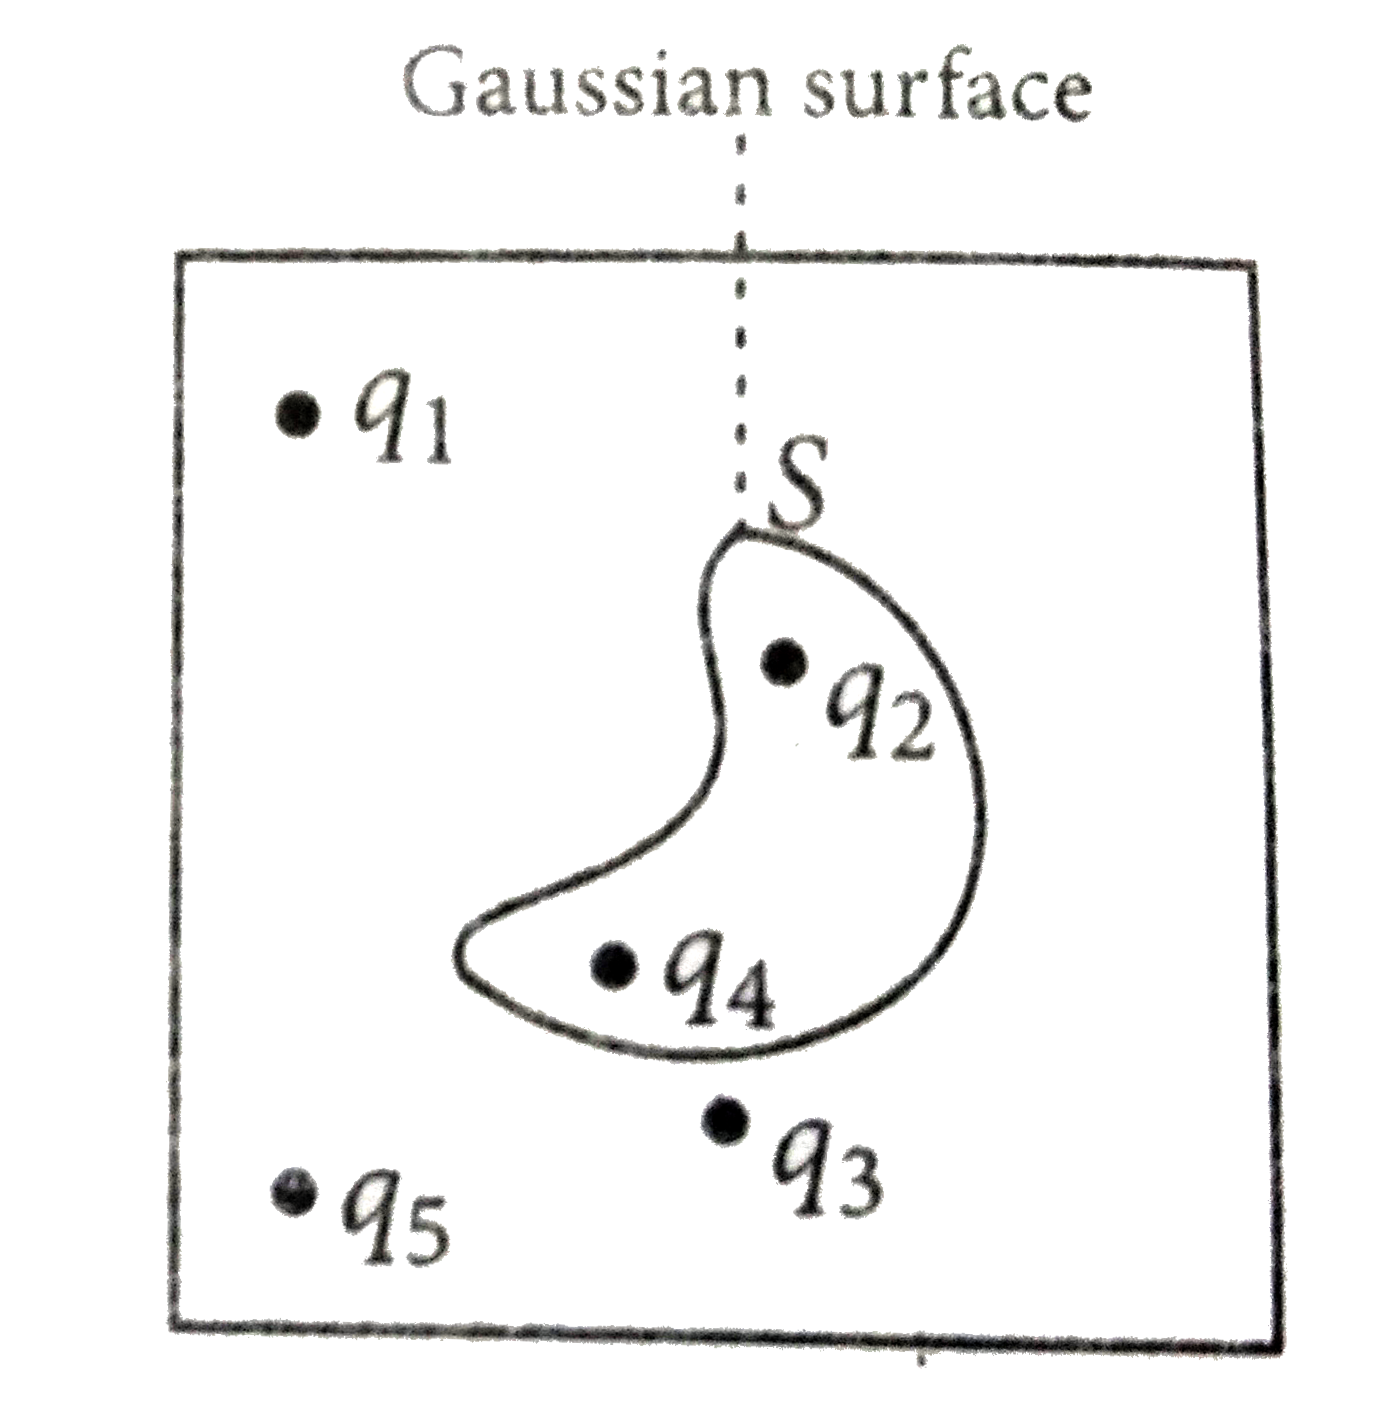 Five charges q(1),q(2),q(3),q(4)andq(5) are fixed at their positions as shown in figure. S is Gaussian surface. The Gauss's law is given by ointundersetSvecE*vec(ds)=q/epsilon(0). Which of the following statements is correct?